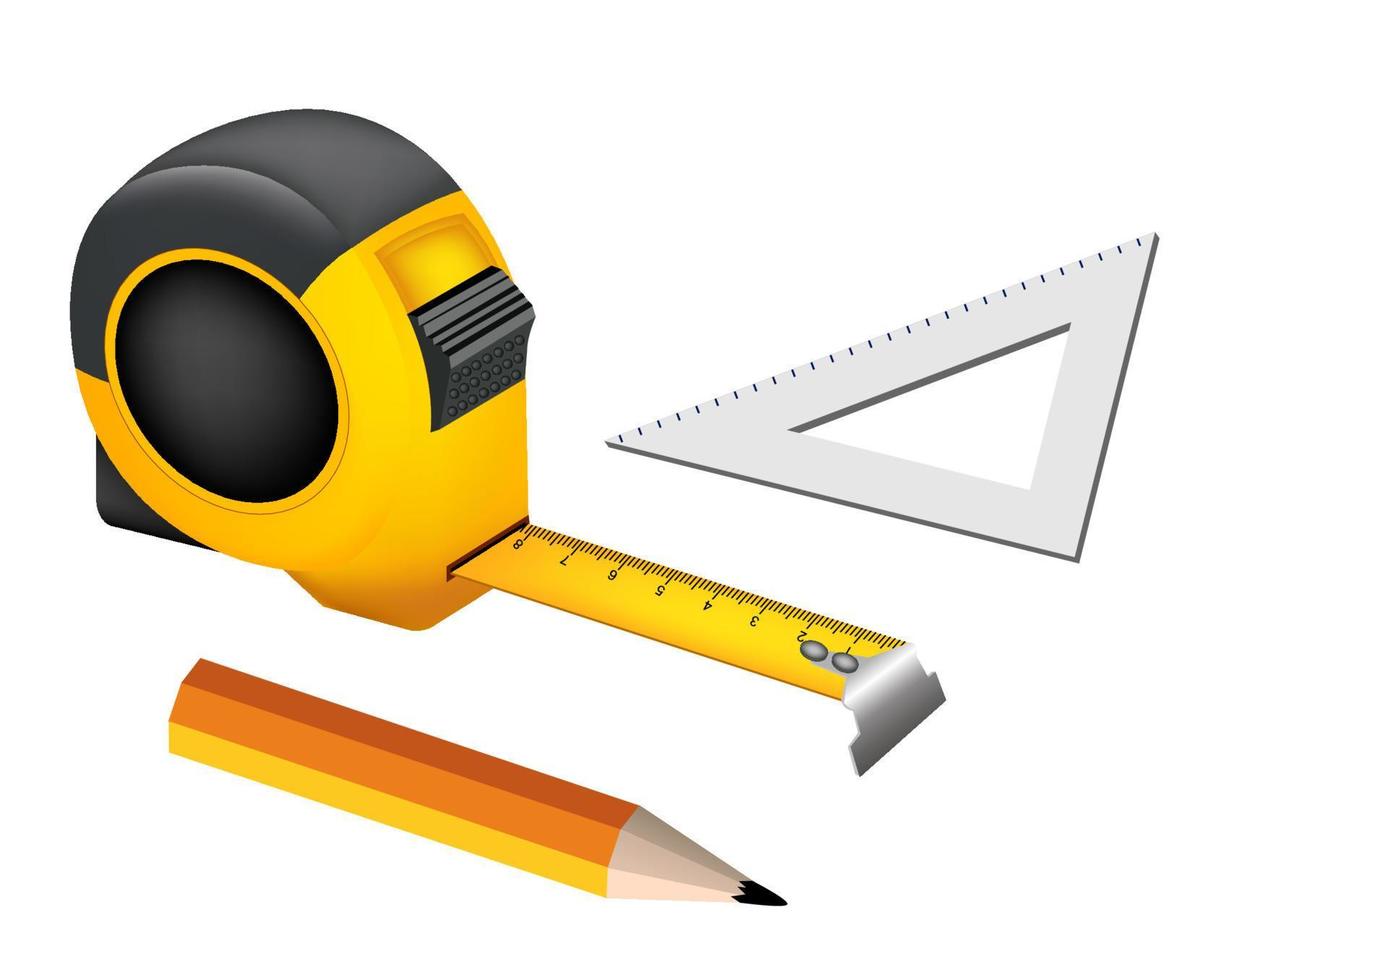 Yellow roulette generator with pencil and triangular ruler on white background. Flat style cartoon illustration vector